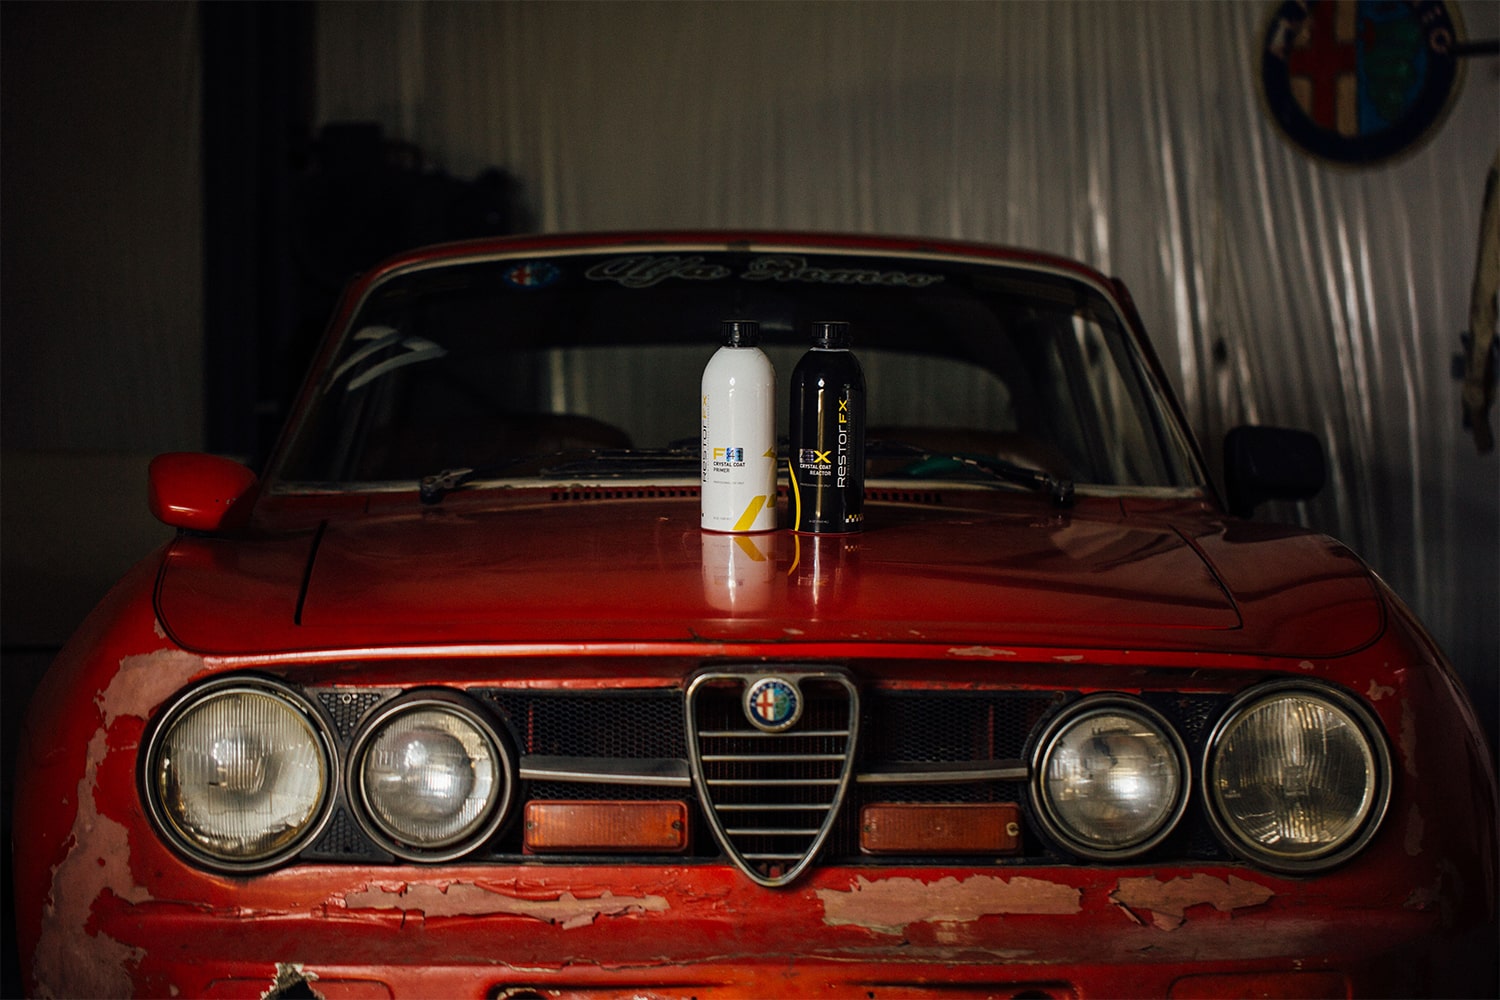 RestorFX F and X product bottles on the hood of a red vintage 1967 Alfa Romeo Giulia Coupe 1750 GTV